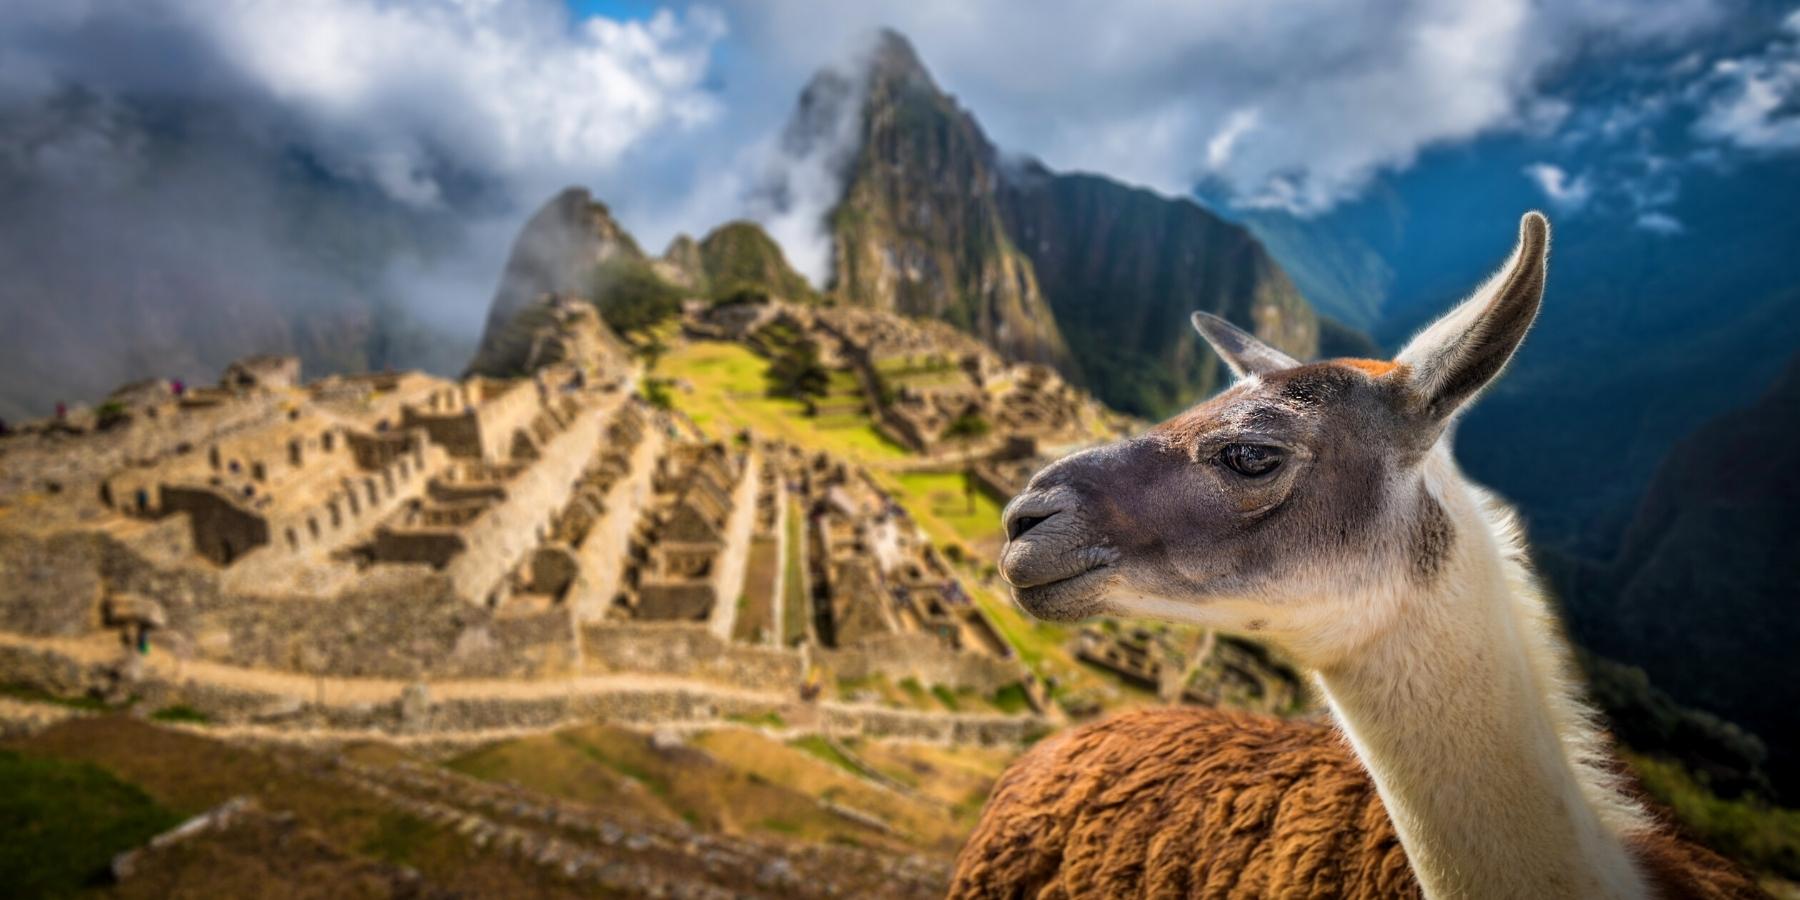 4.- HOW LONG DOES IT TAKE TO WALK THE INCA TRAIL?